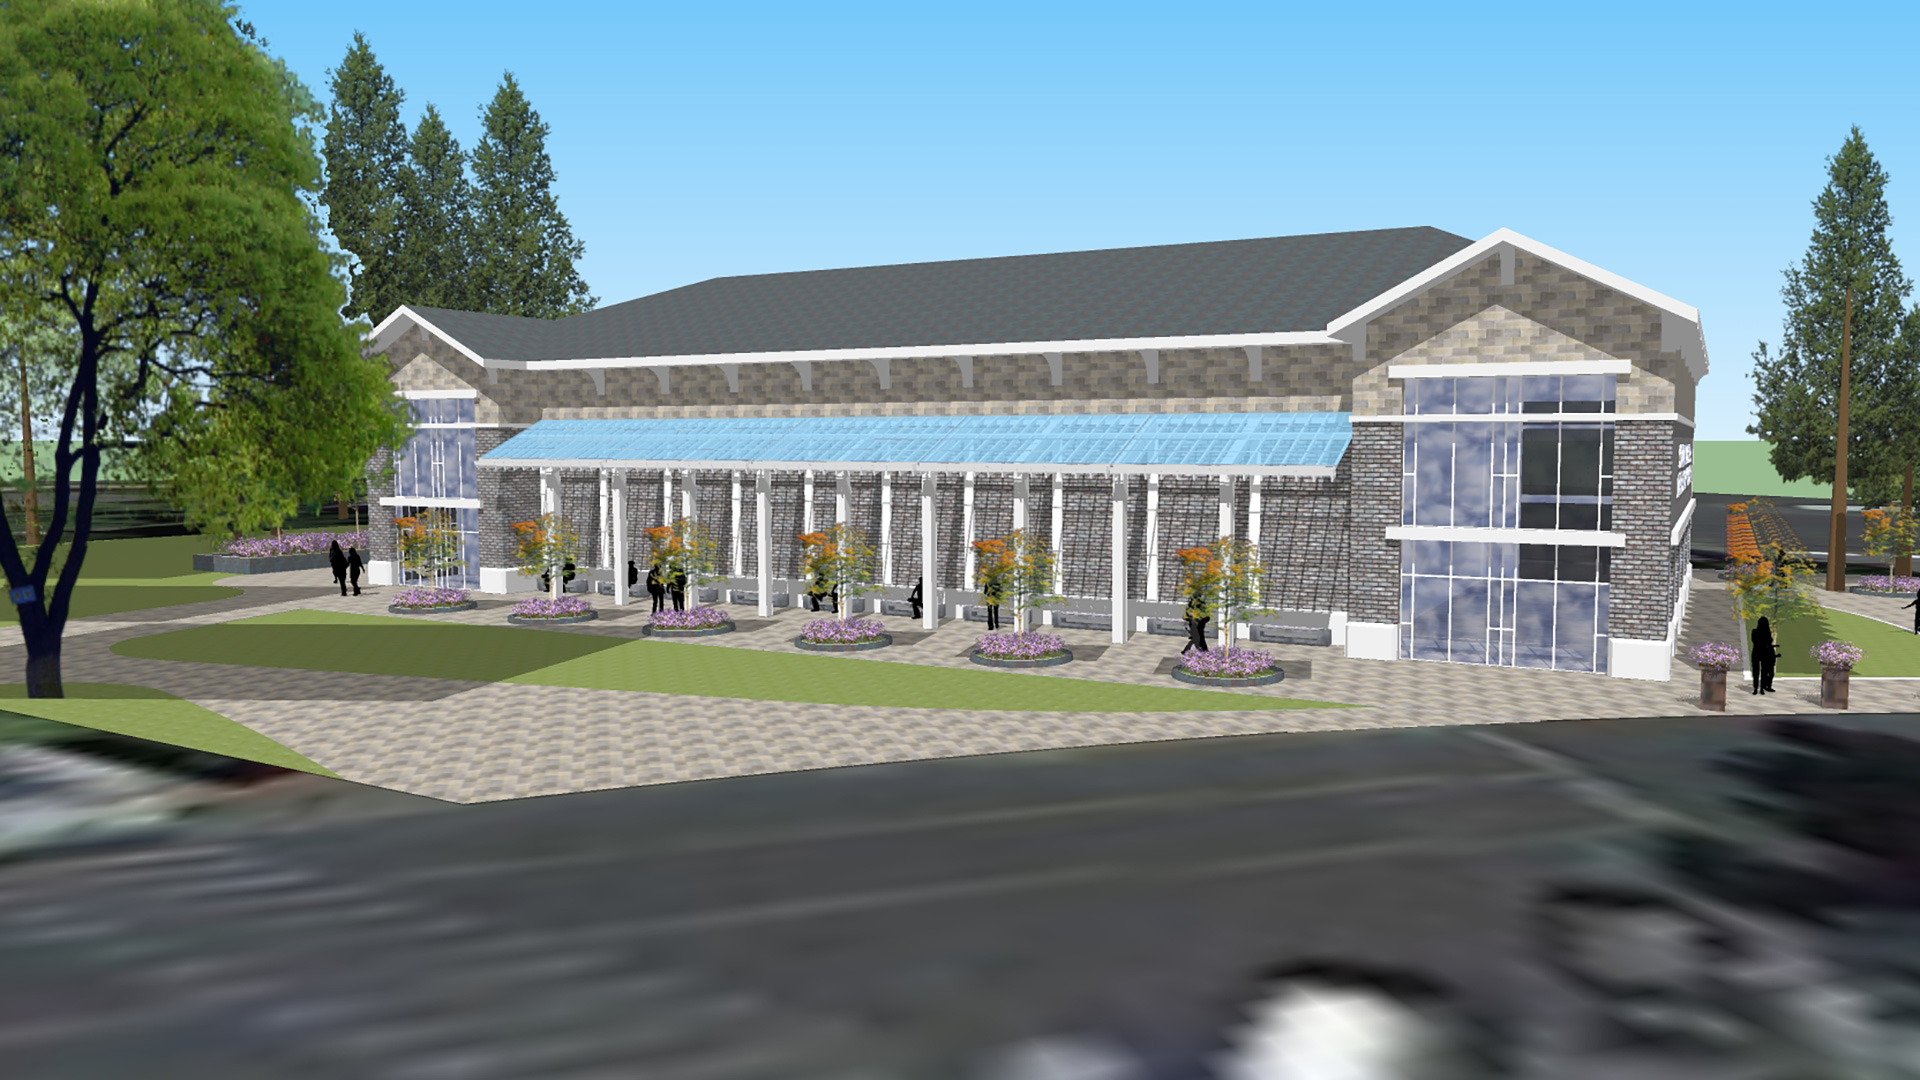 Rendering of theater exterior, vast stone walls with large class awning over a walkway in front of the building.